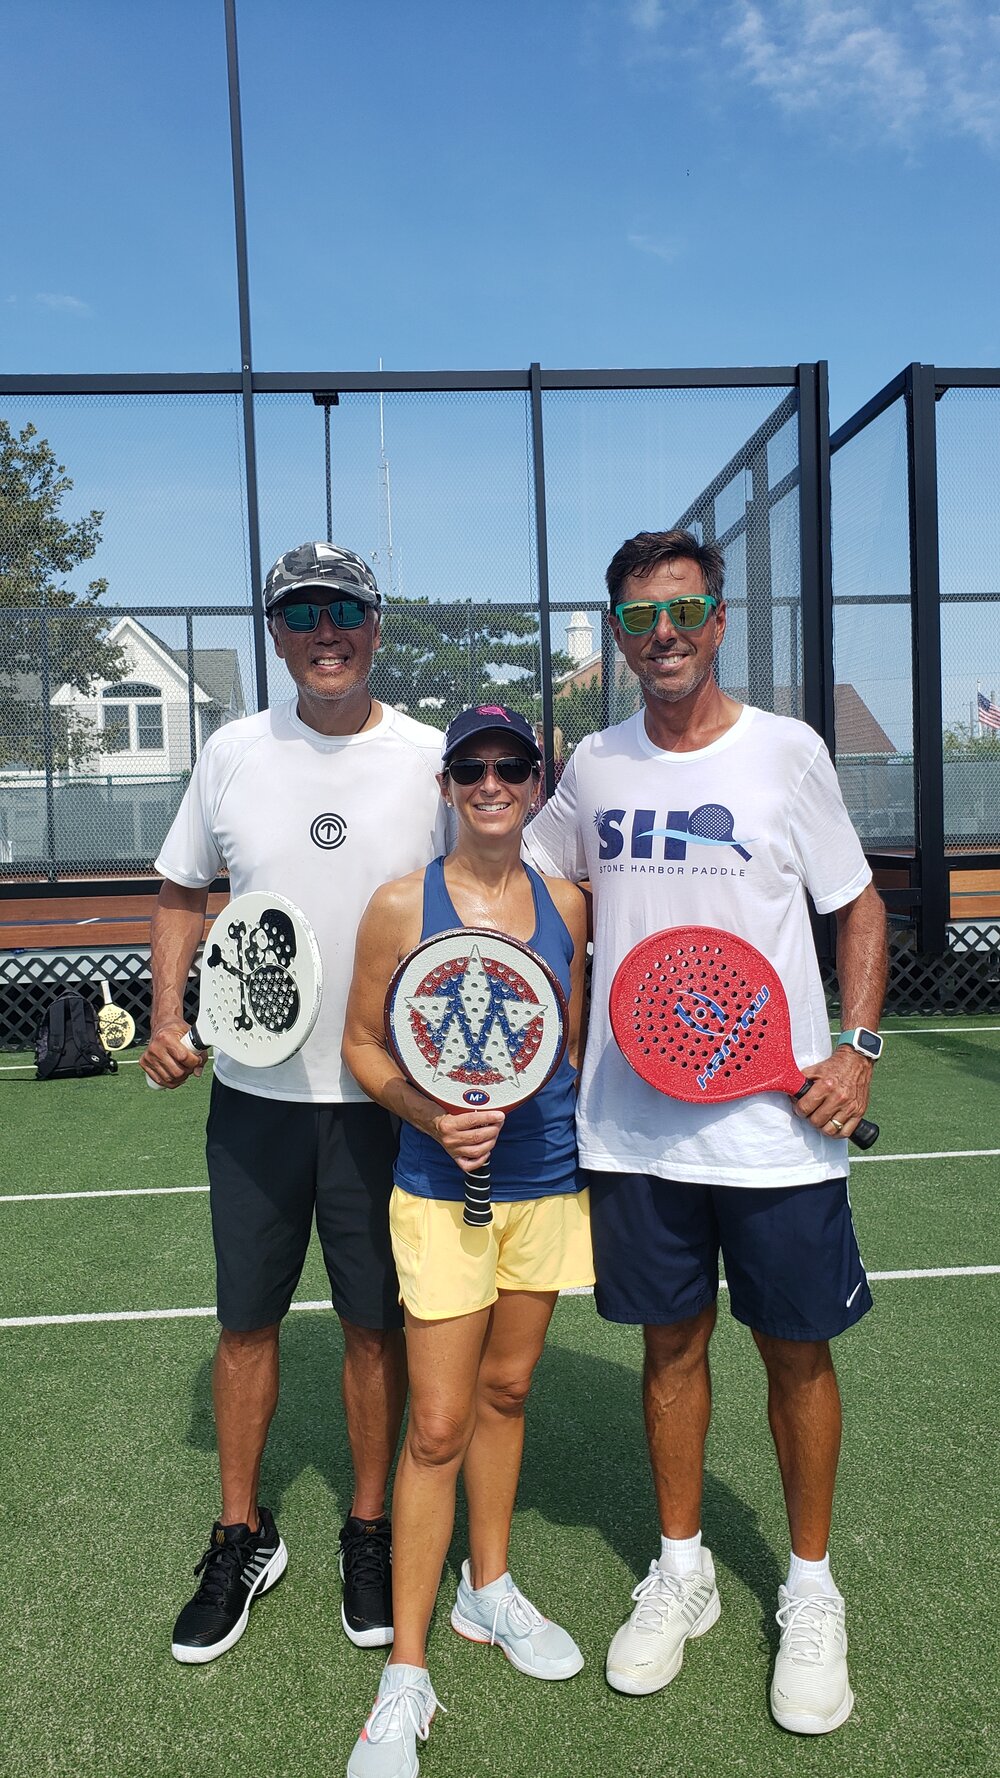 Stone Harbor paddle players (from left): Tom King, Laura Owens, and Greg Eger.